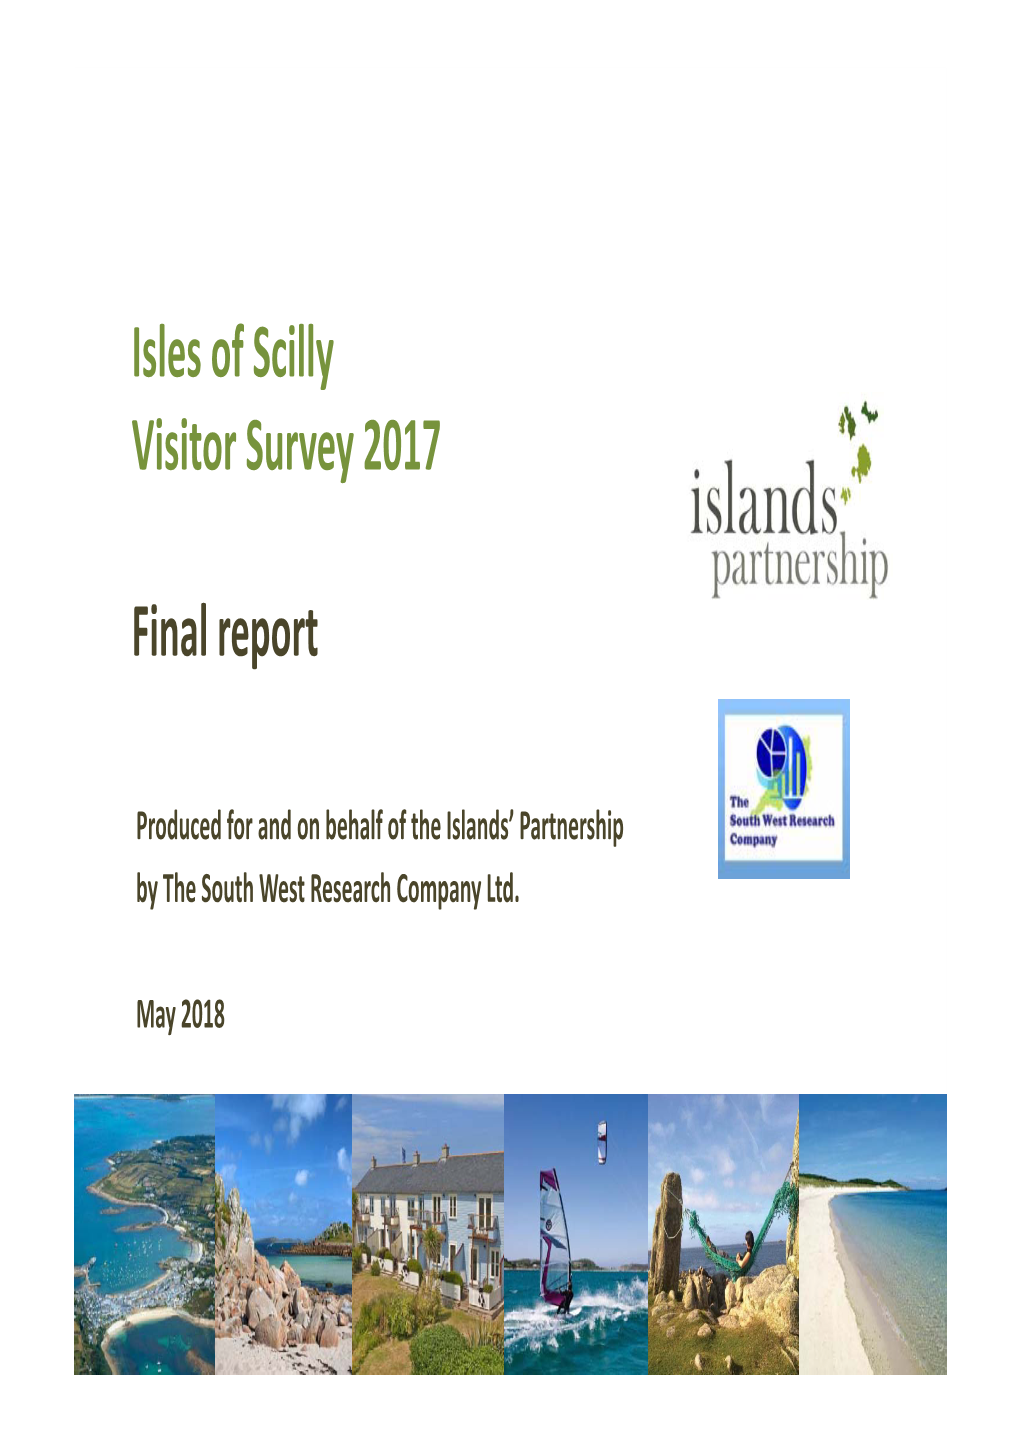 Isles of Scilly Visitor Survey 2017 Final Report